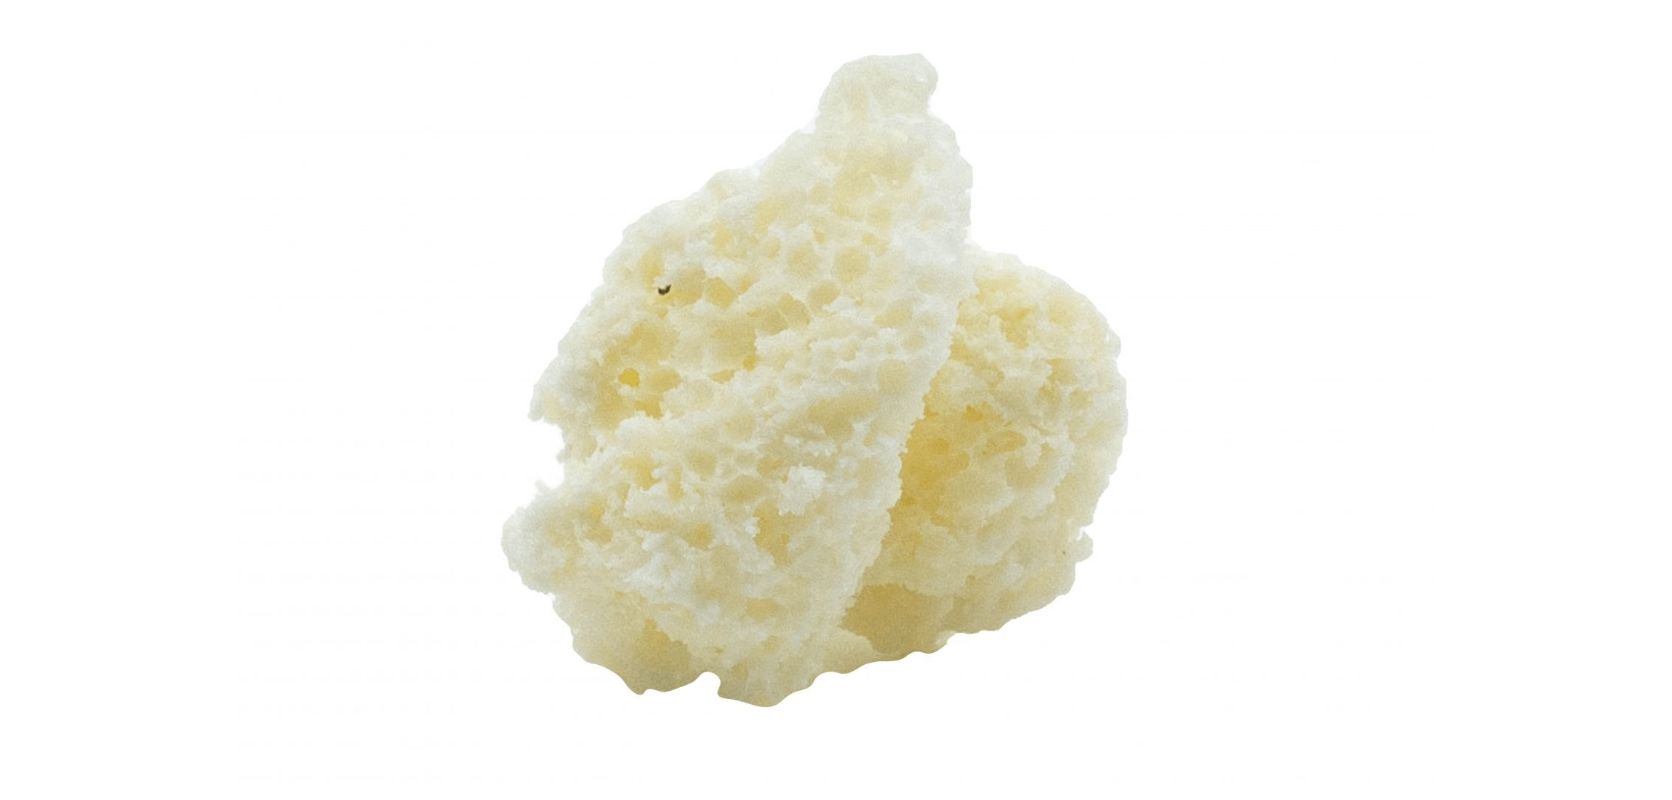 White crumble wax has a unique texture and potency which offers a variety of consumption methods users can enjoy.